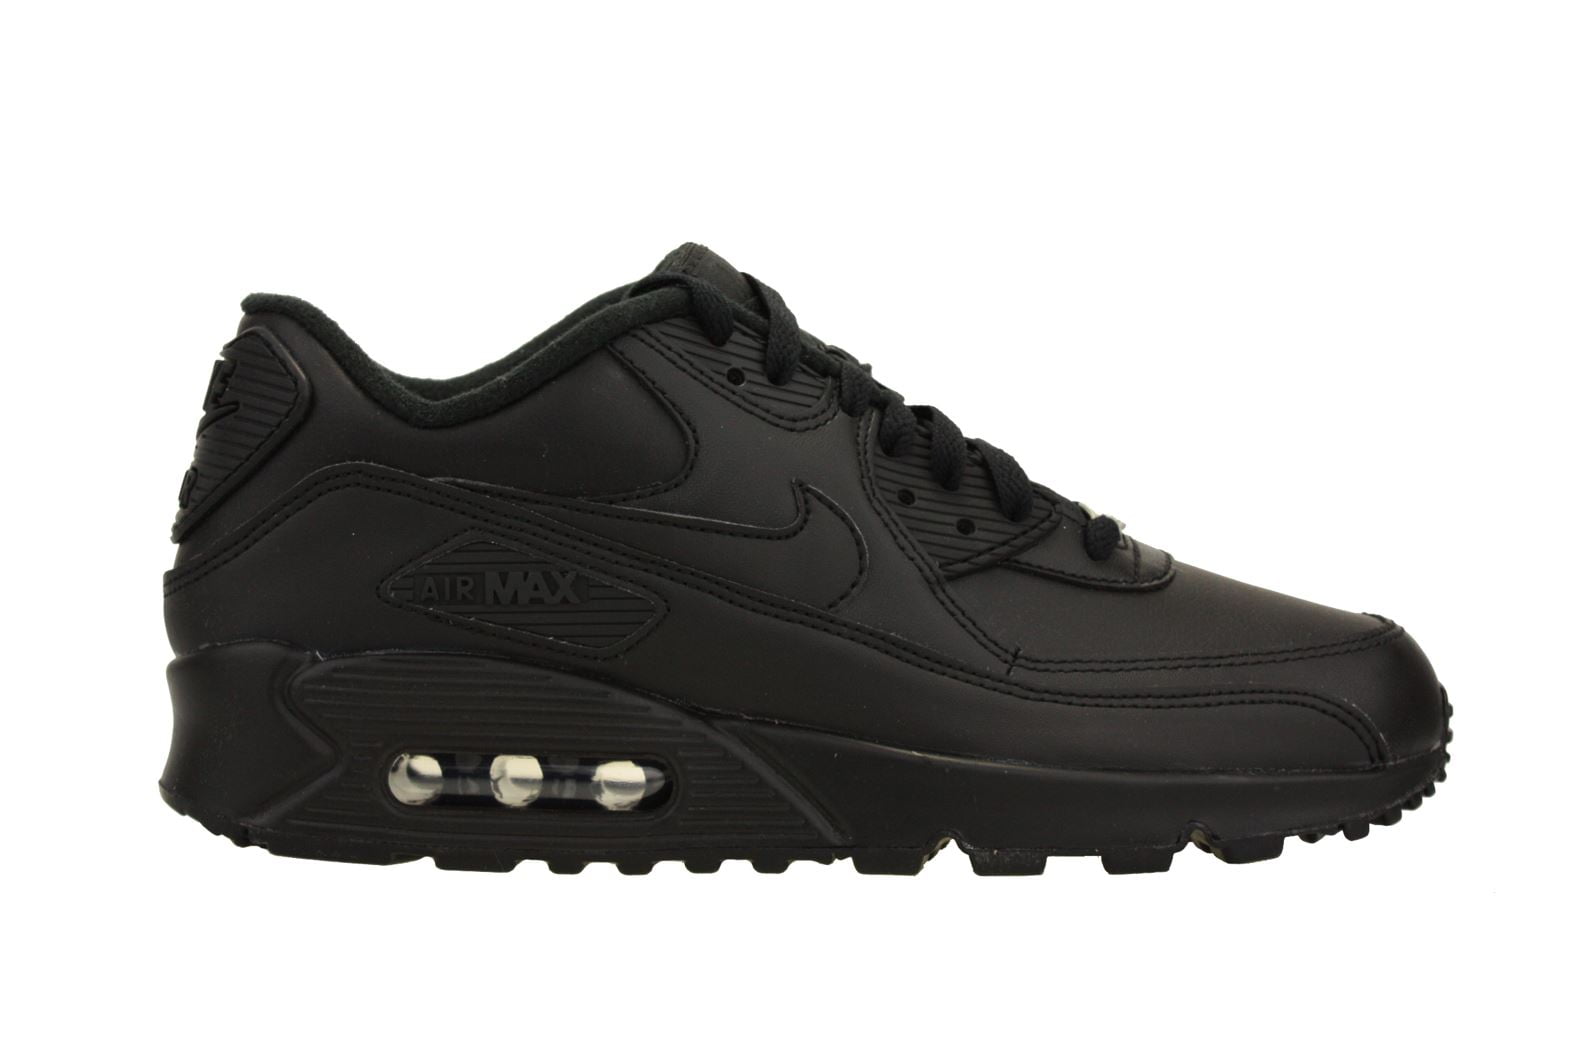 Nike Mens Air Max 90 Leather Running Shoes Black/Black 302519-001 Size